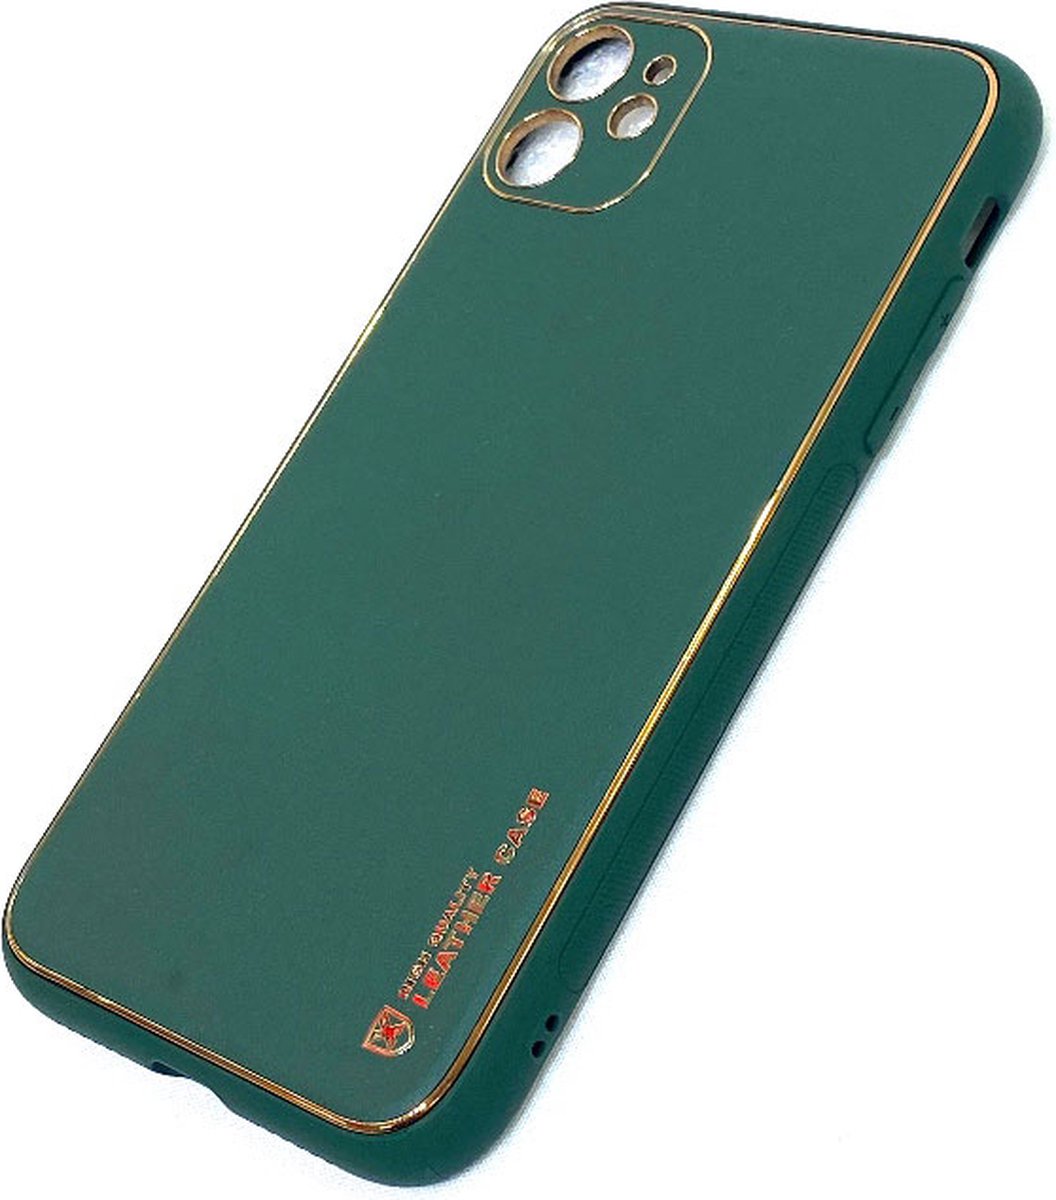 JPM Iphone 12 Green Leather Case